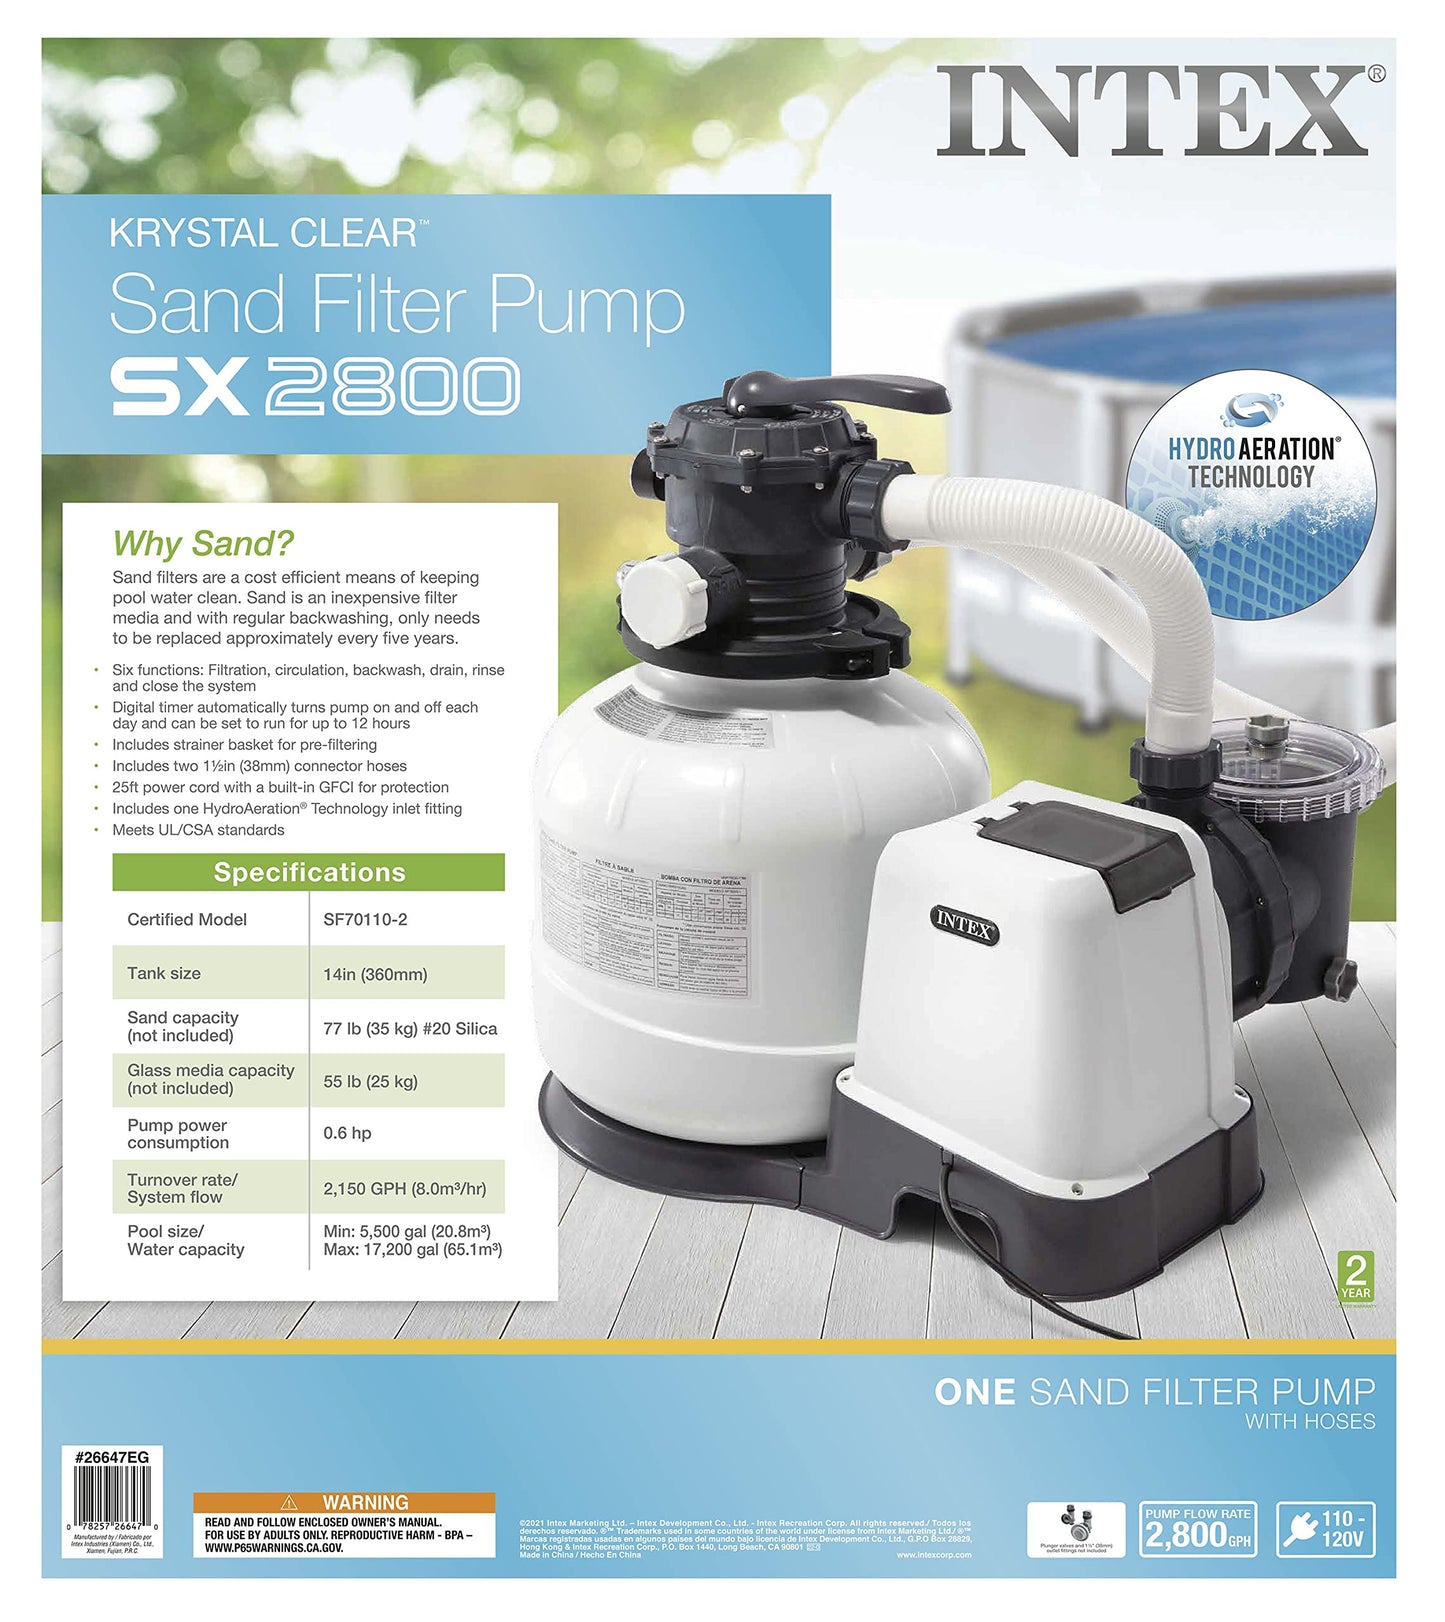 INTEX 26647EG SX2800 Krystal Clear Sand Filter Pump for Above Ground Pools, 14in